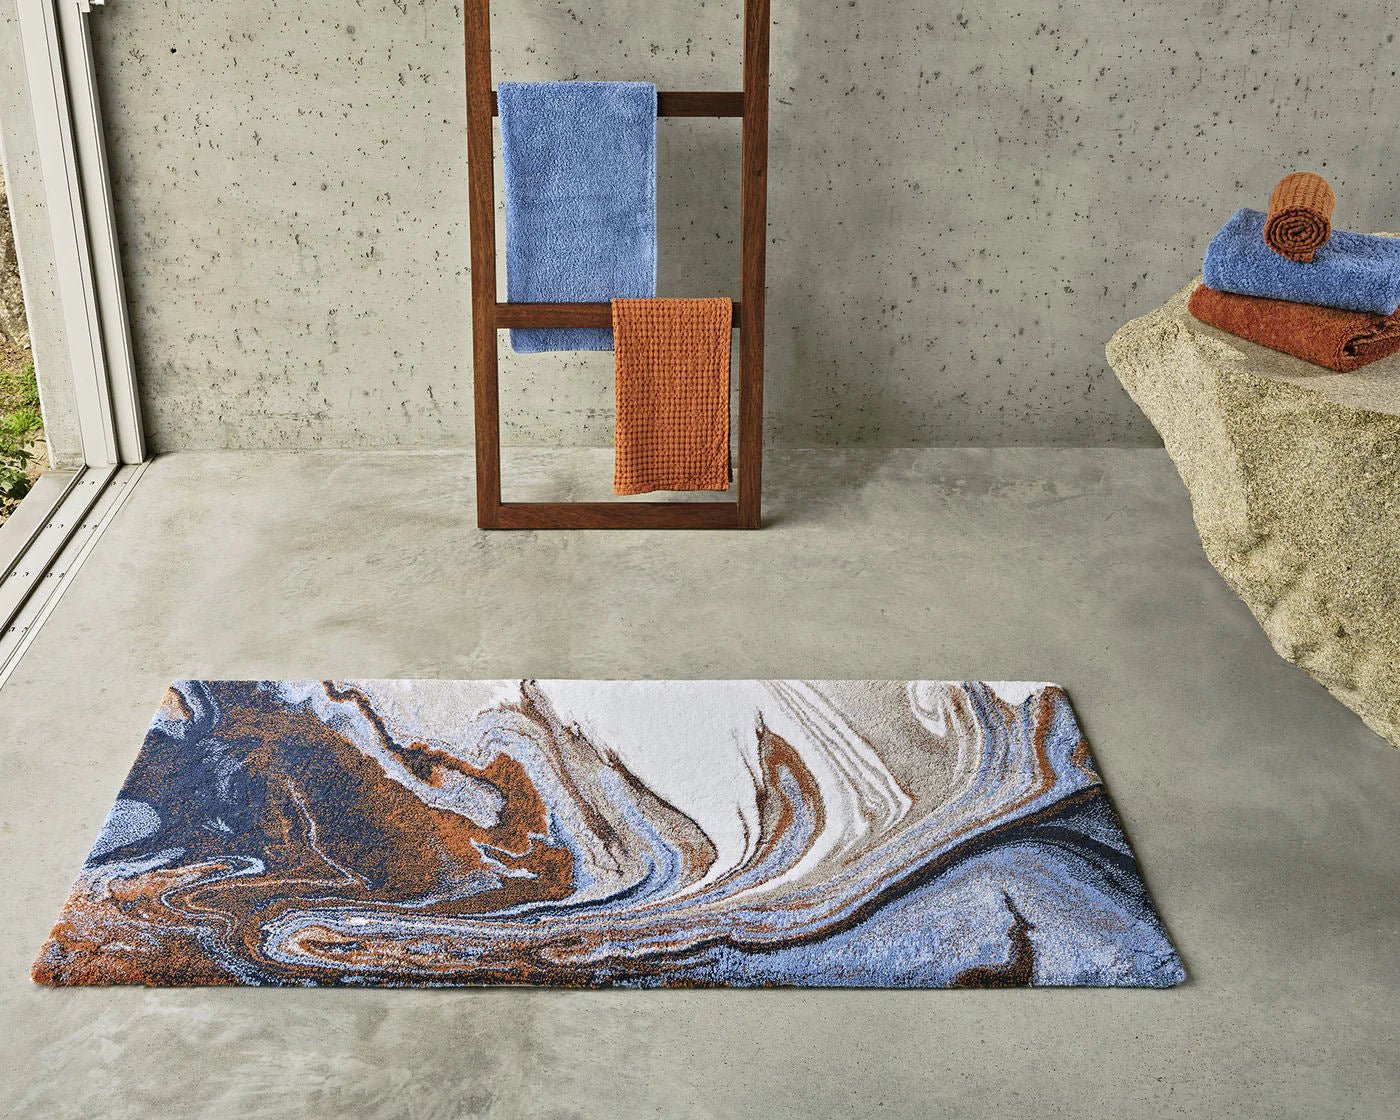 VINCE Abyss Habidecor Blue and Caramel Bath Mat - |VESIMI Design| Luxury and Rustic bathrooms online